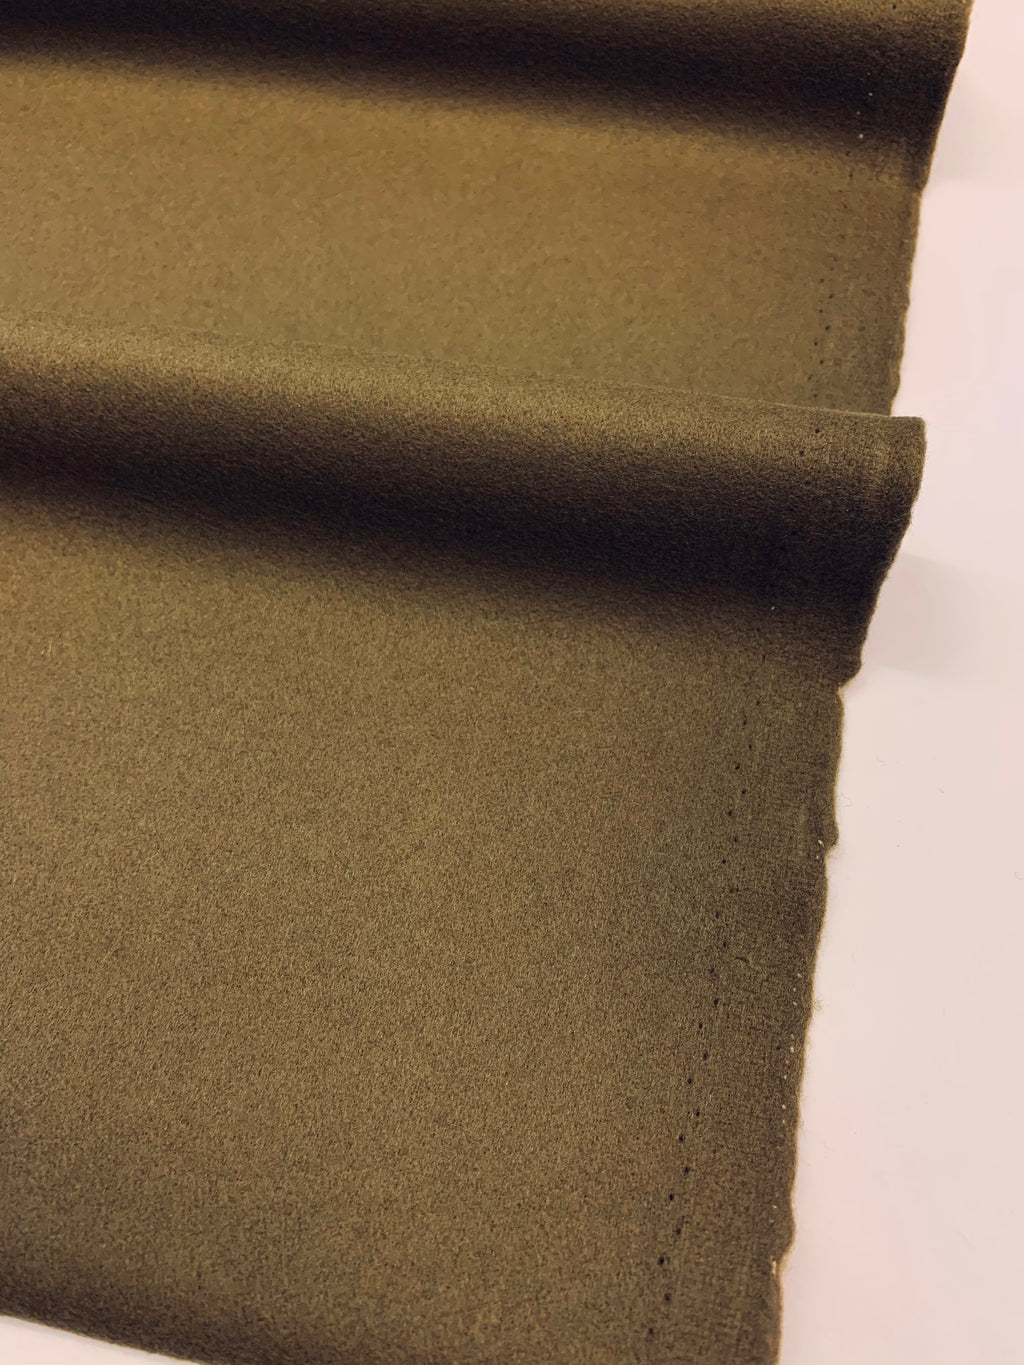 OLIVE wool mix coating fabric/ DEADSTOCK